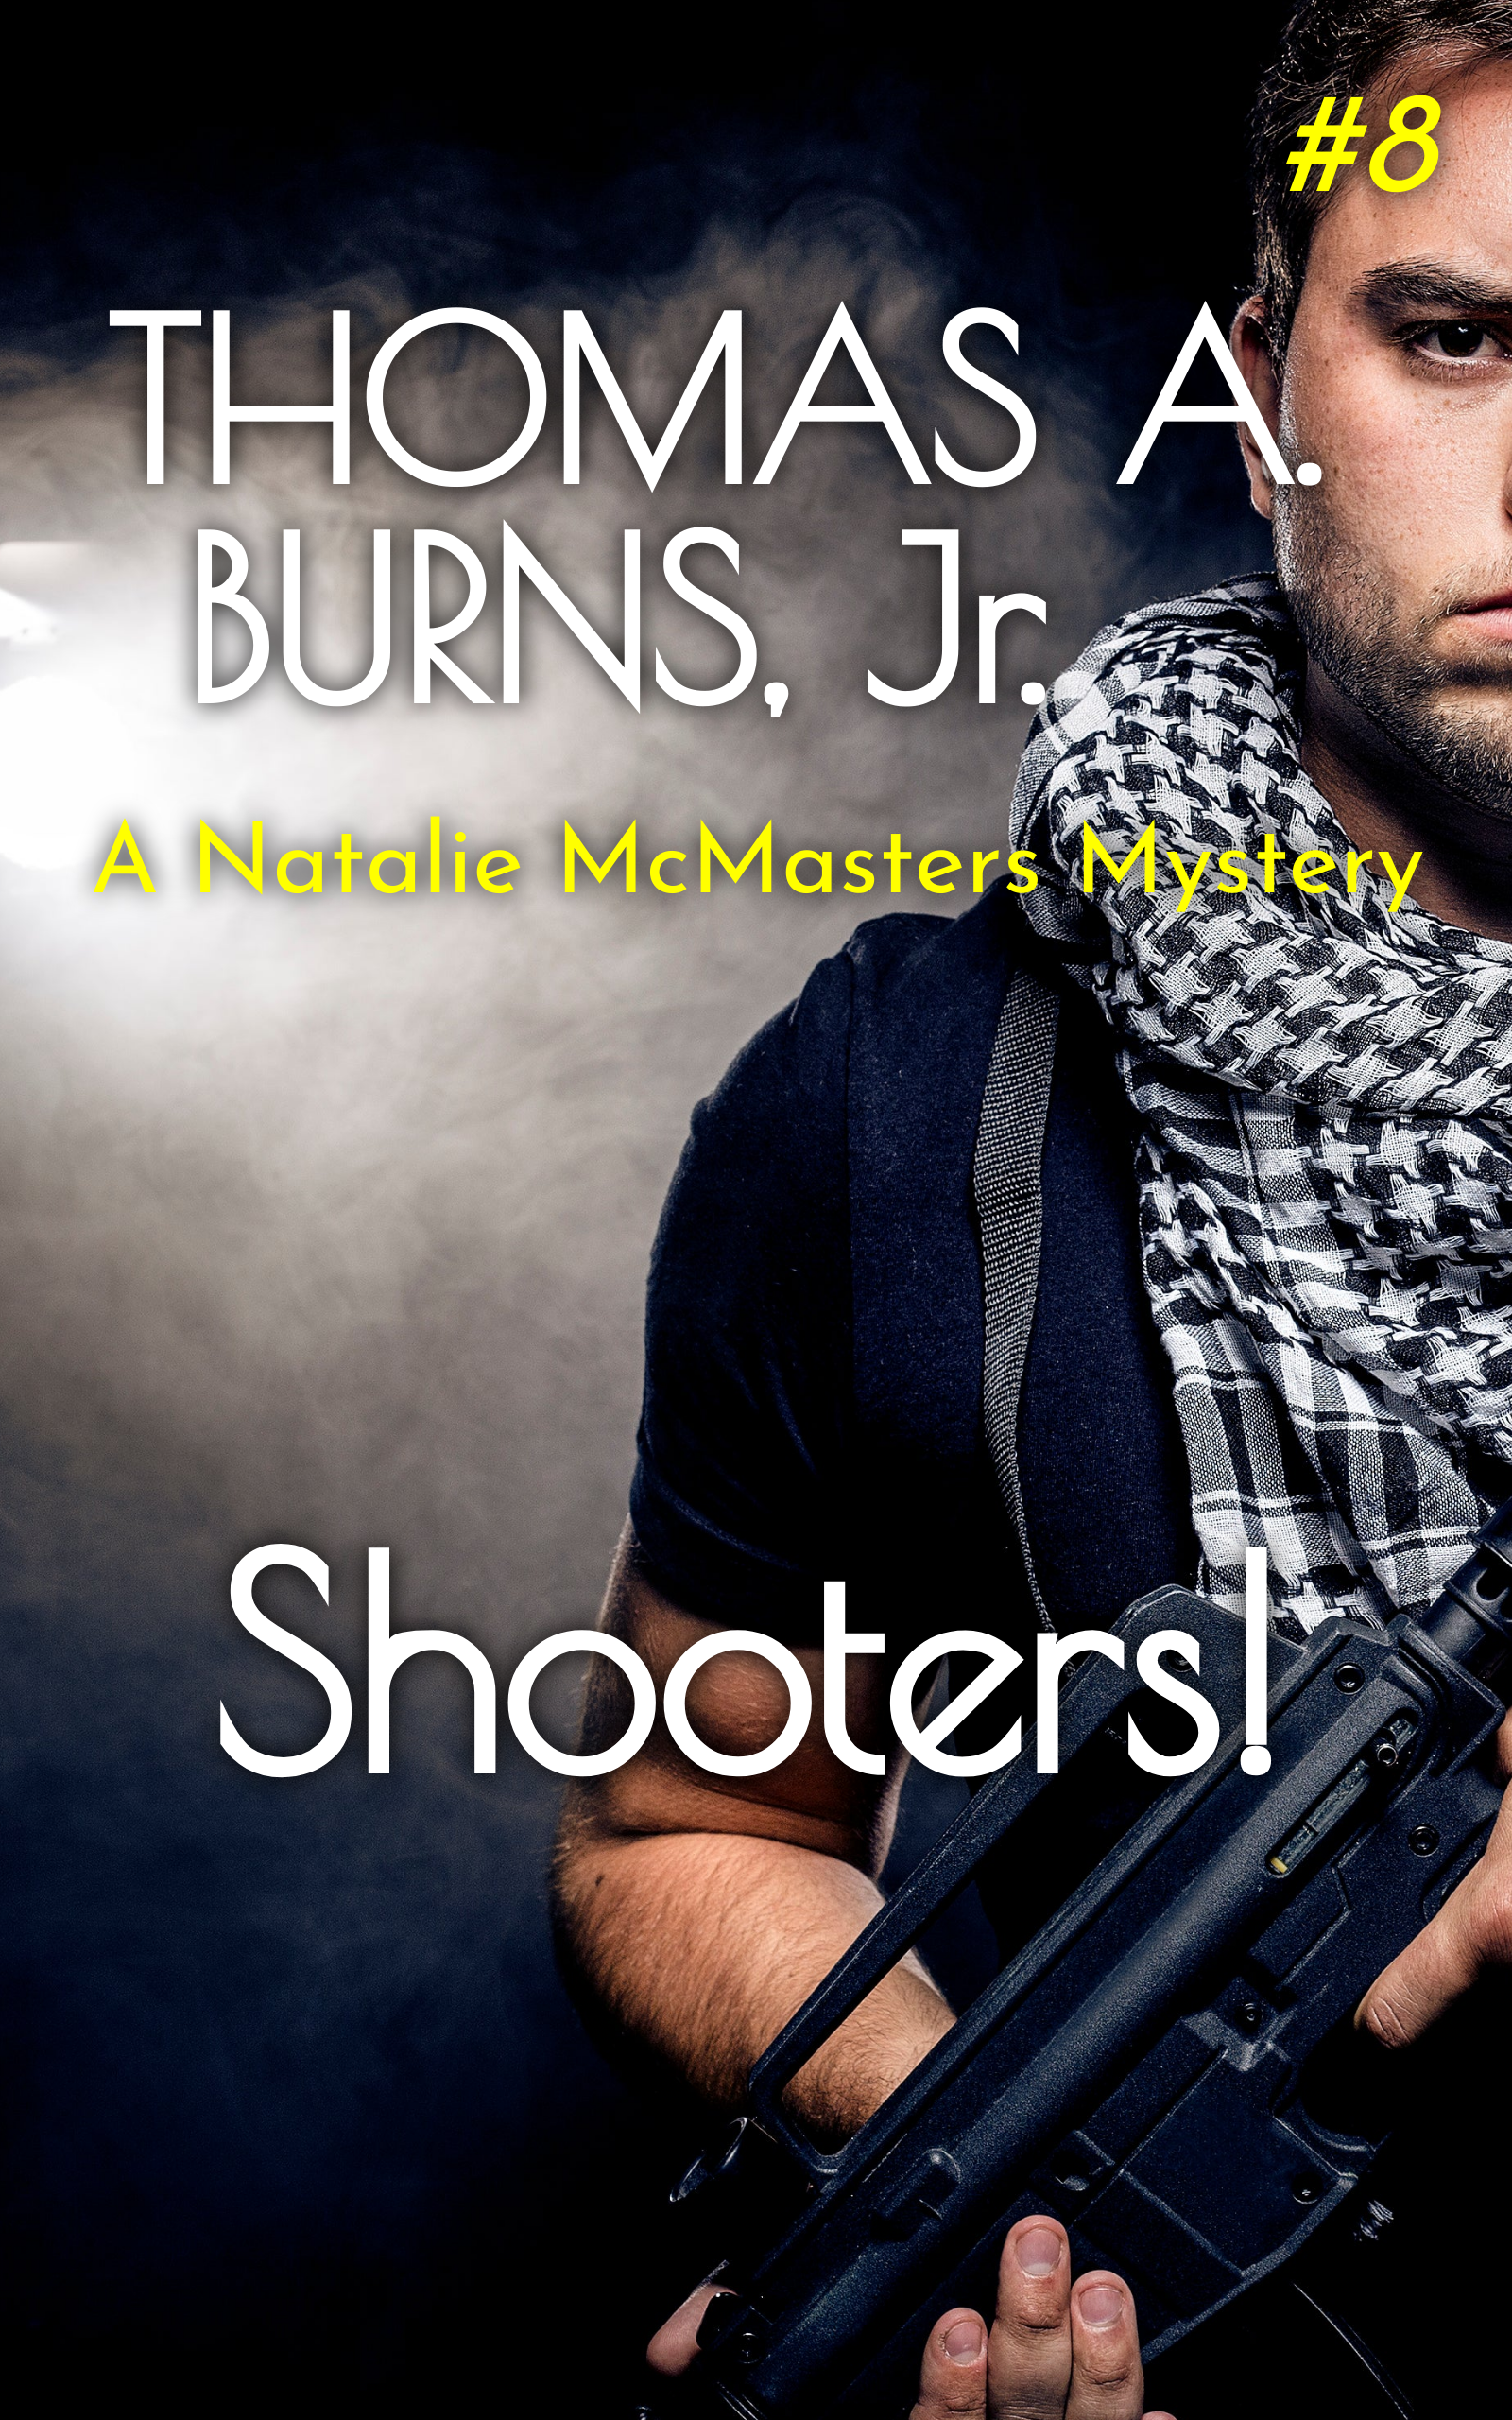 The front cover of Shooters!: A Natalie McMasters Mystery by Thomas A. Burns Jr. 